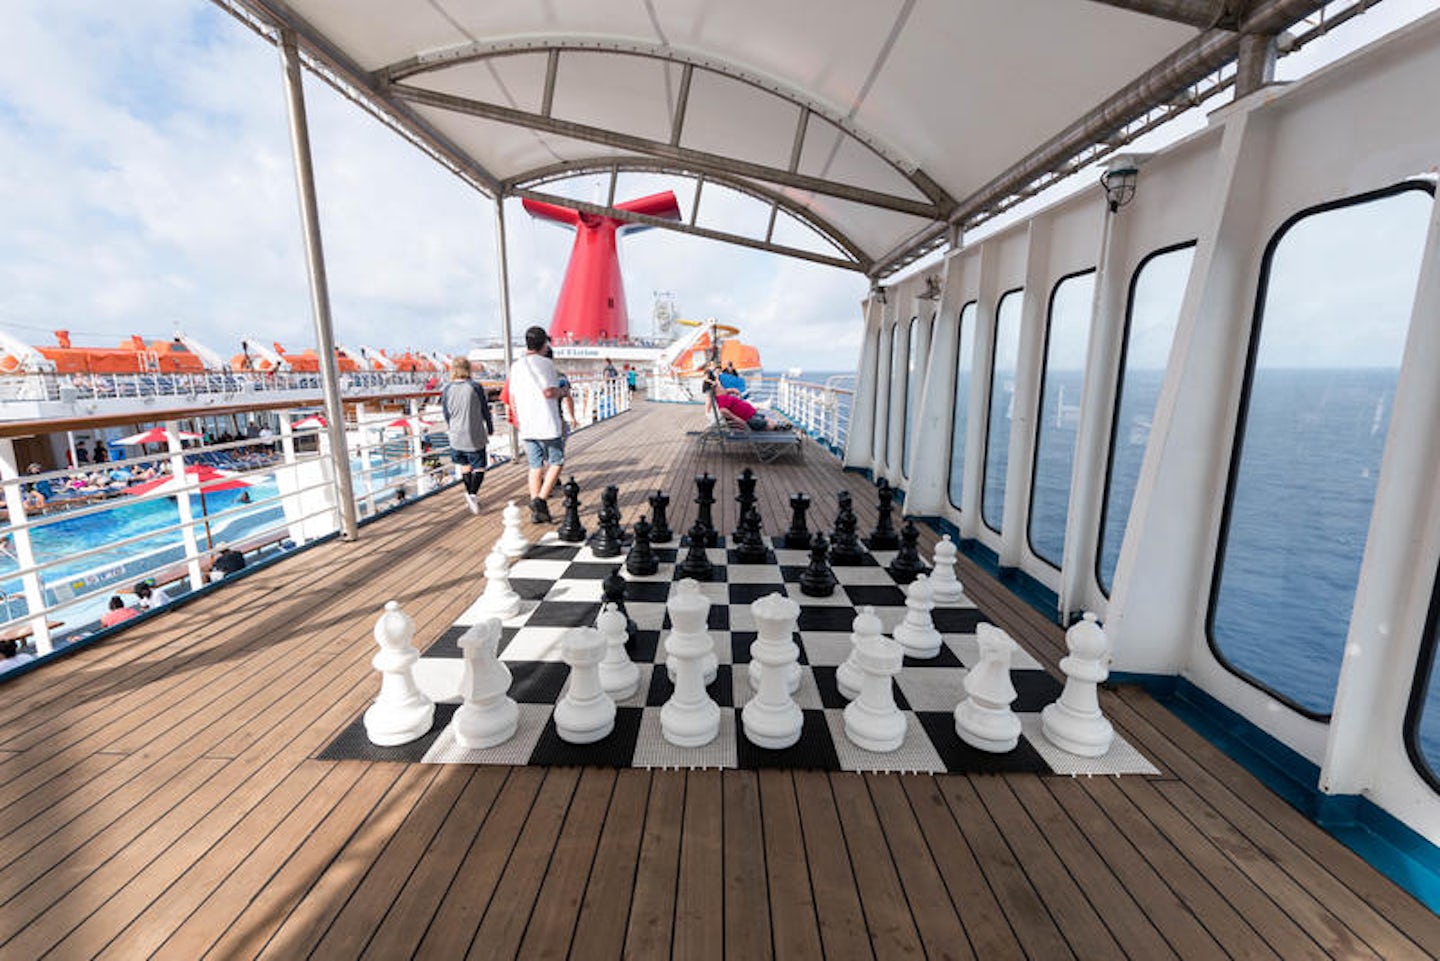 Giant Chess on Carnival Elation